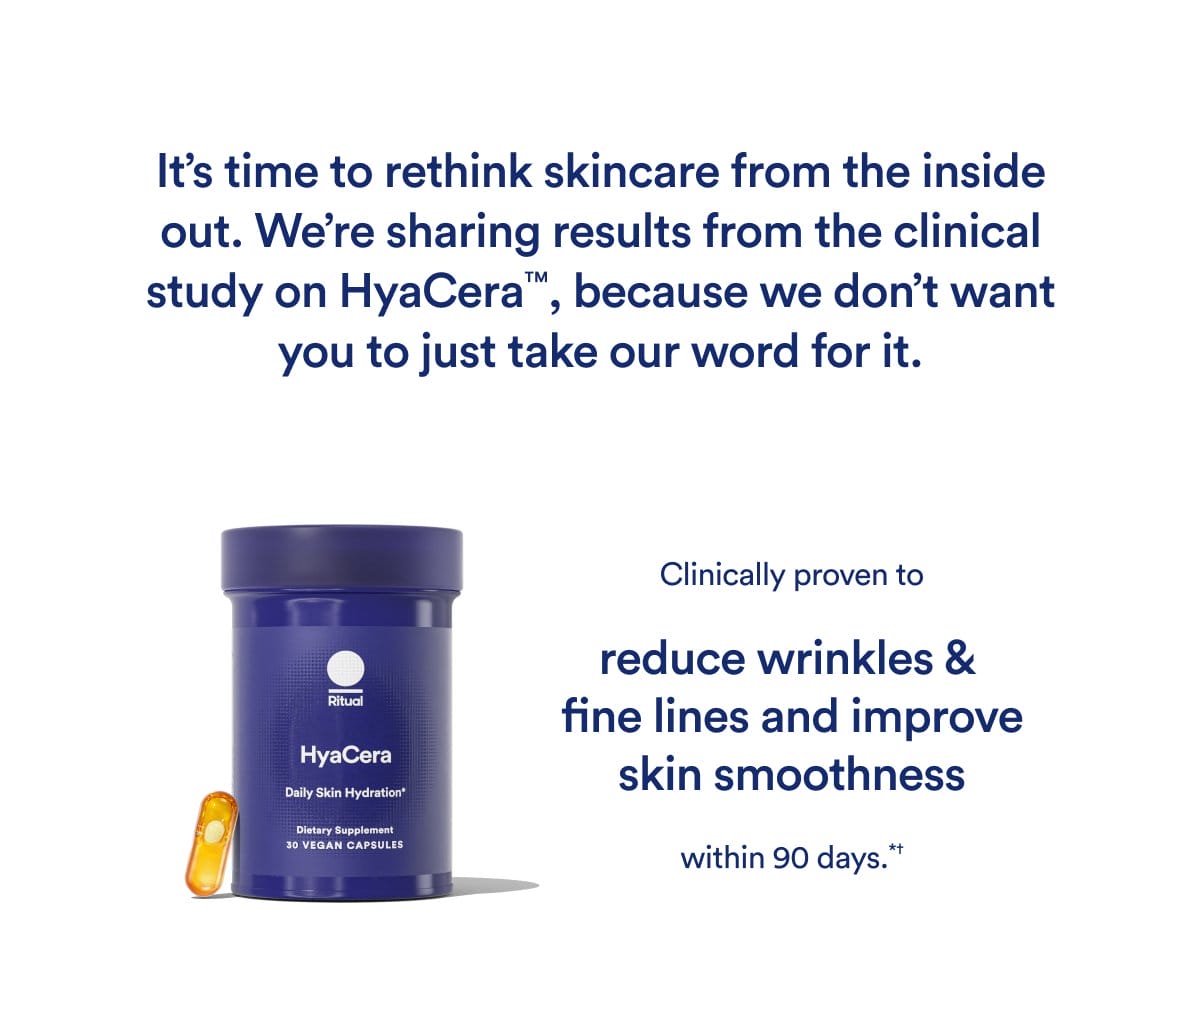 It's time to rethink skincare from the inside out. We're sharing results from the clinical study on HyaCera™, because we don't want you to just take our word for it. | Clinically proven to reduce wrinkles & fine lines and improve skin smoothness within 90 days.*†